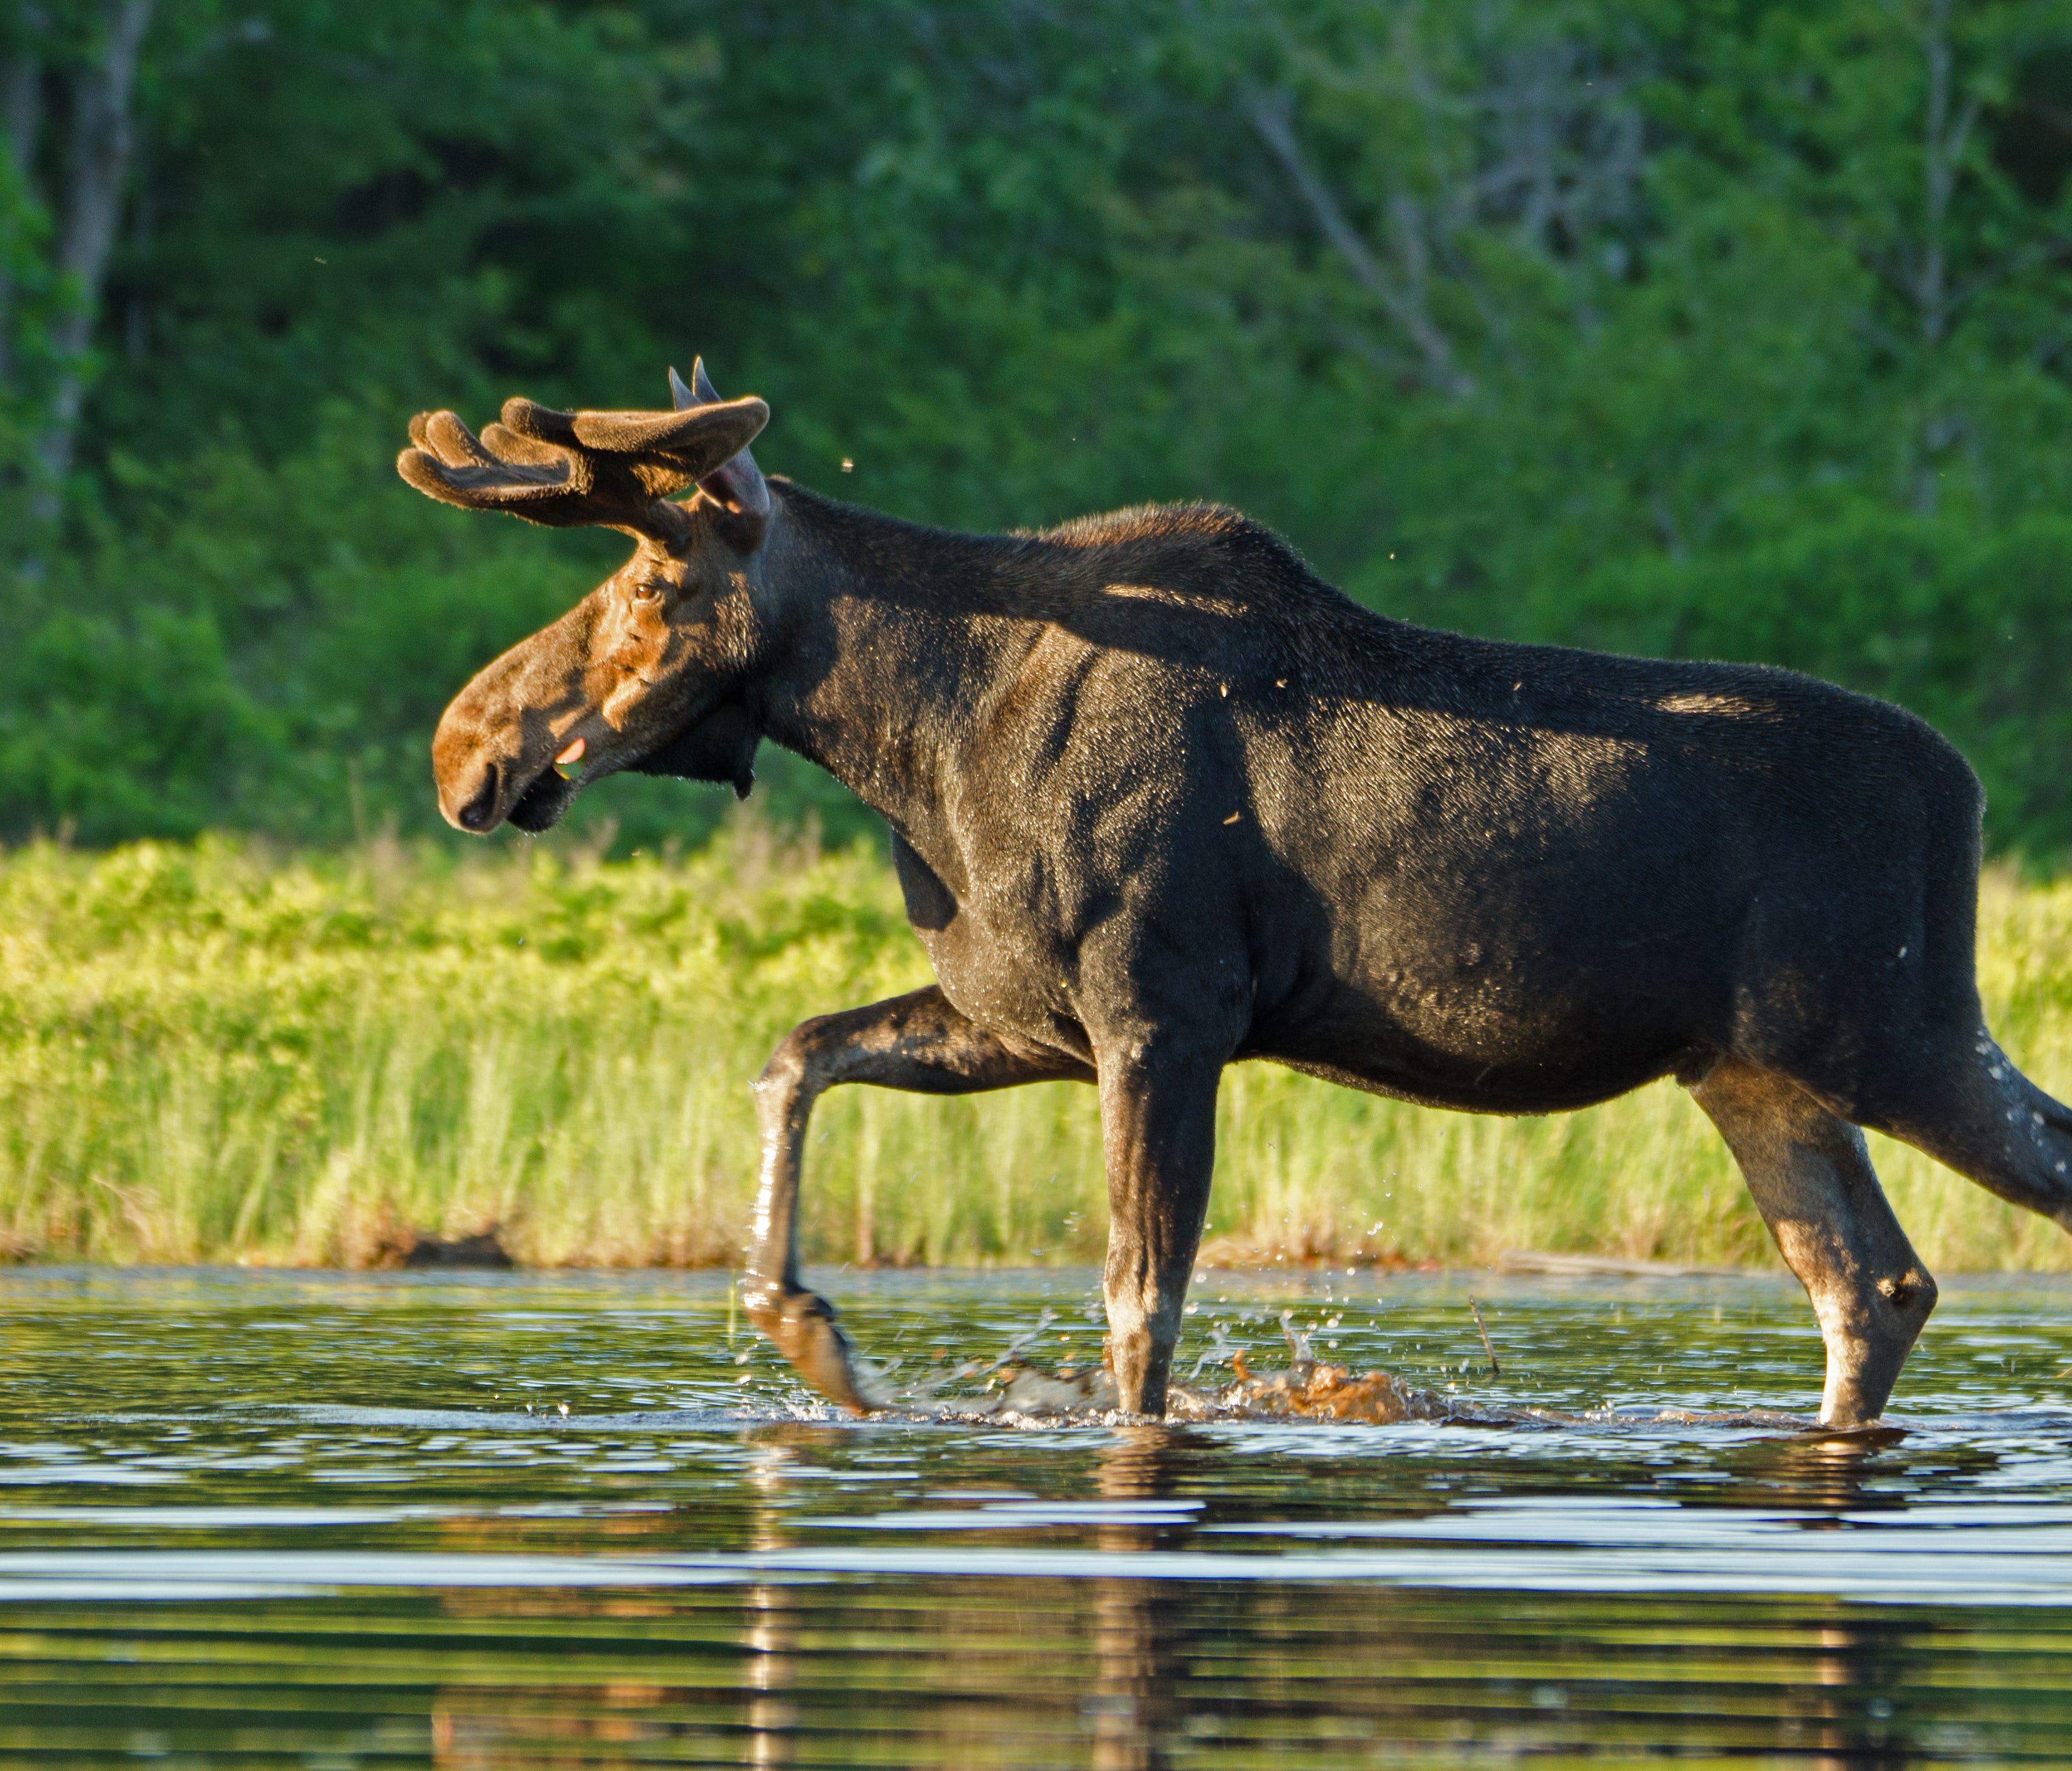 Moose sightings are common in Katahdin Woods and Waters, where moose outnumber staff by several orders of magnitude.